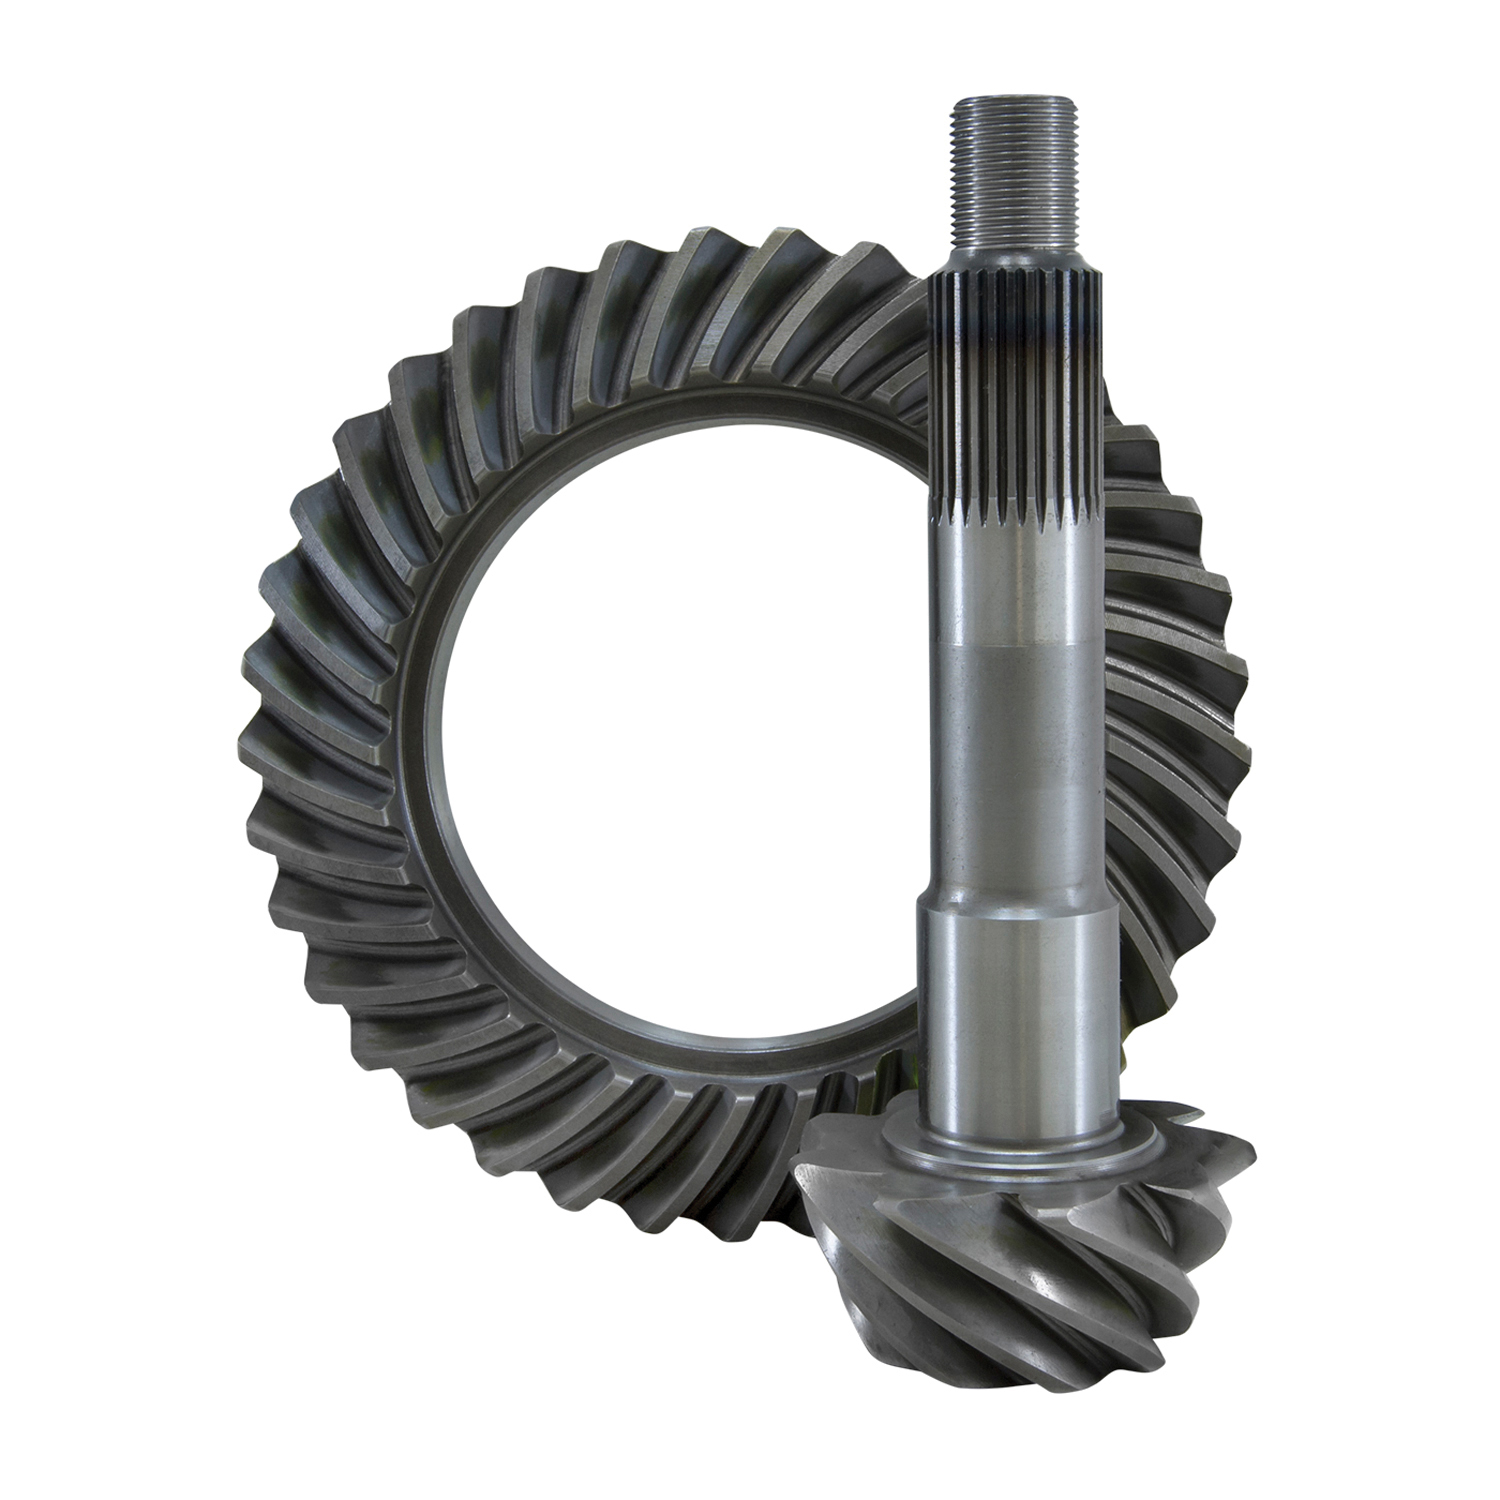 USA Standard Ring & Pinion gear set for Toyota 8" in a 4.88 ratio